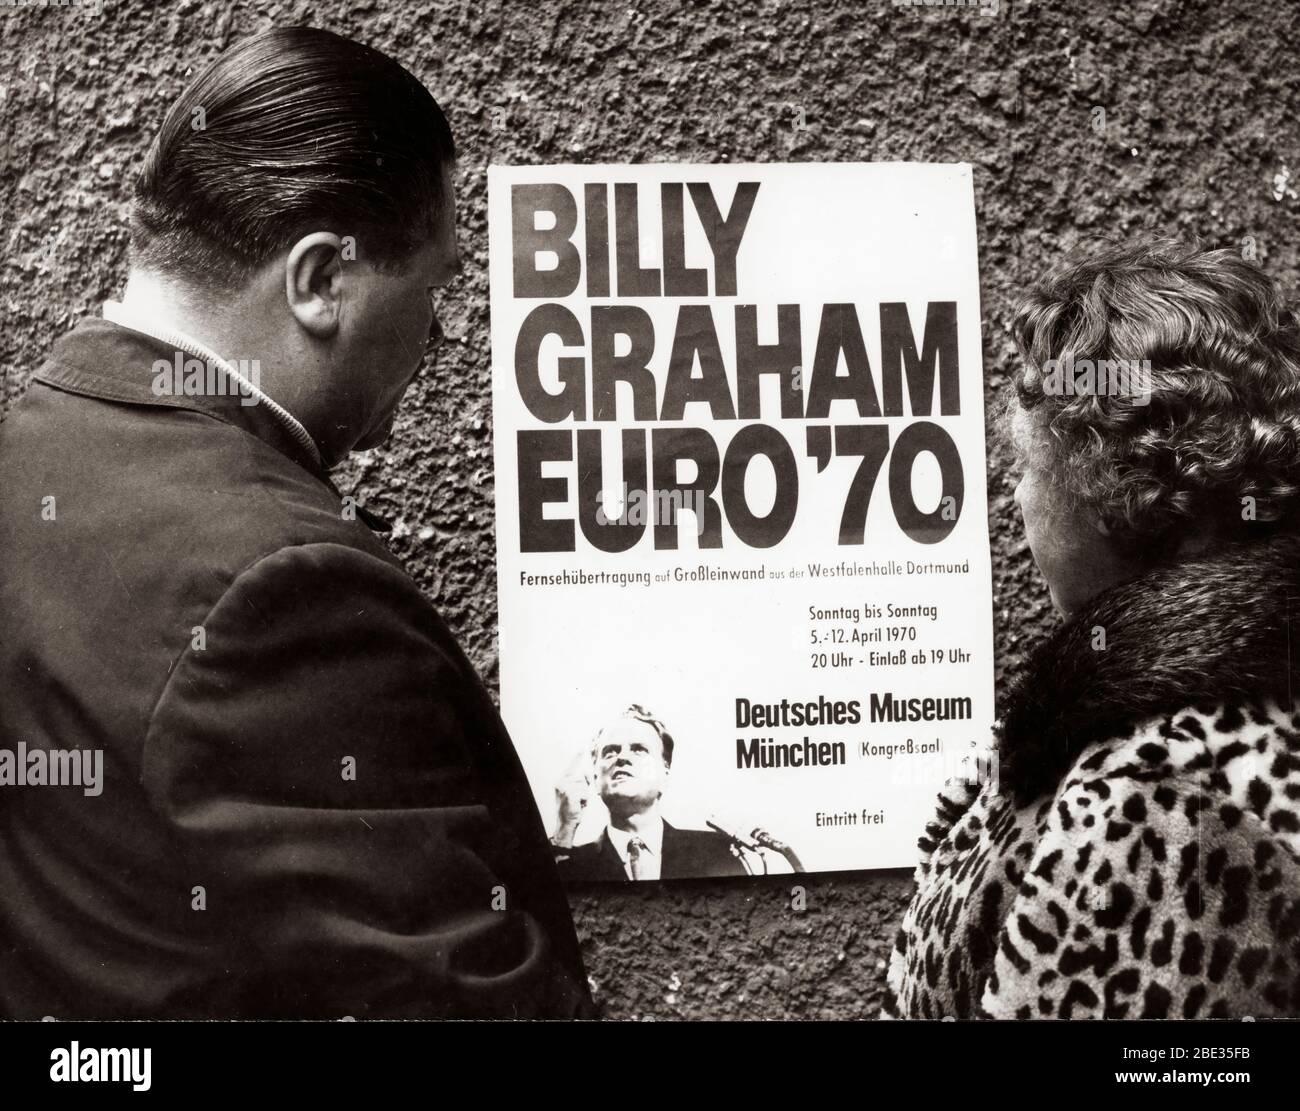 Apr. 2, 1970 - London, England, U.K. - BILLY GRAHAM, born William Franklin Graham, Jr. on November 7, 1918, is an evangelical Christian reverend.  He gained celebrity status by broadcasting his sermons on radio and television. PICTURED: Citizens read poster for Billy Graham's European tour. Stock Photo